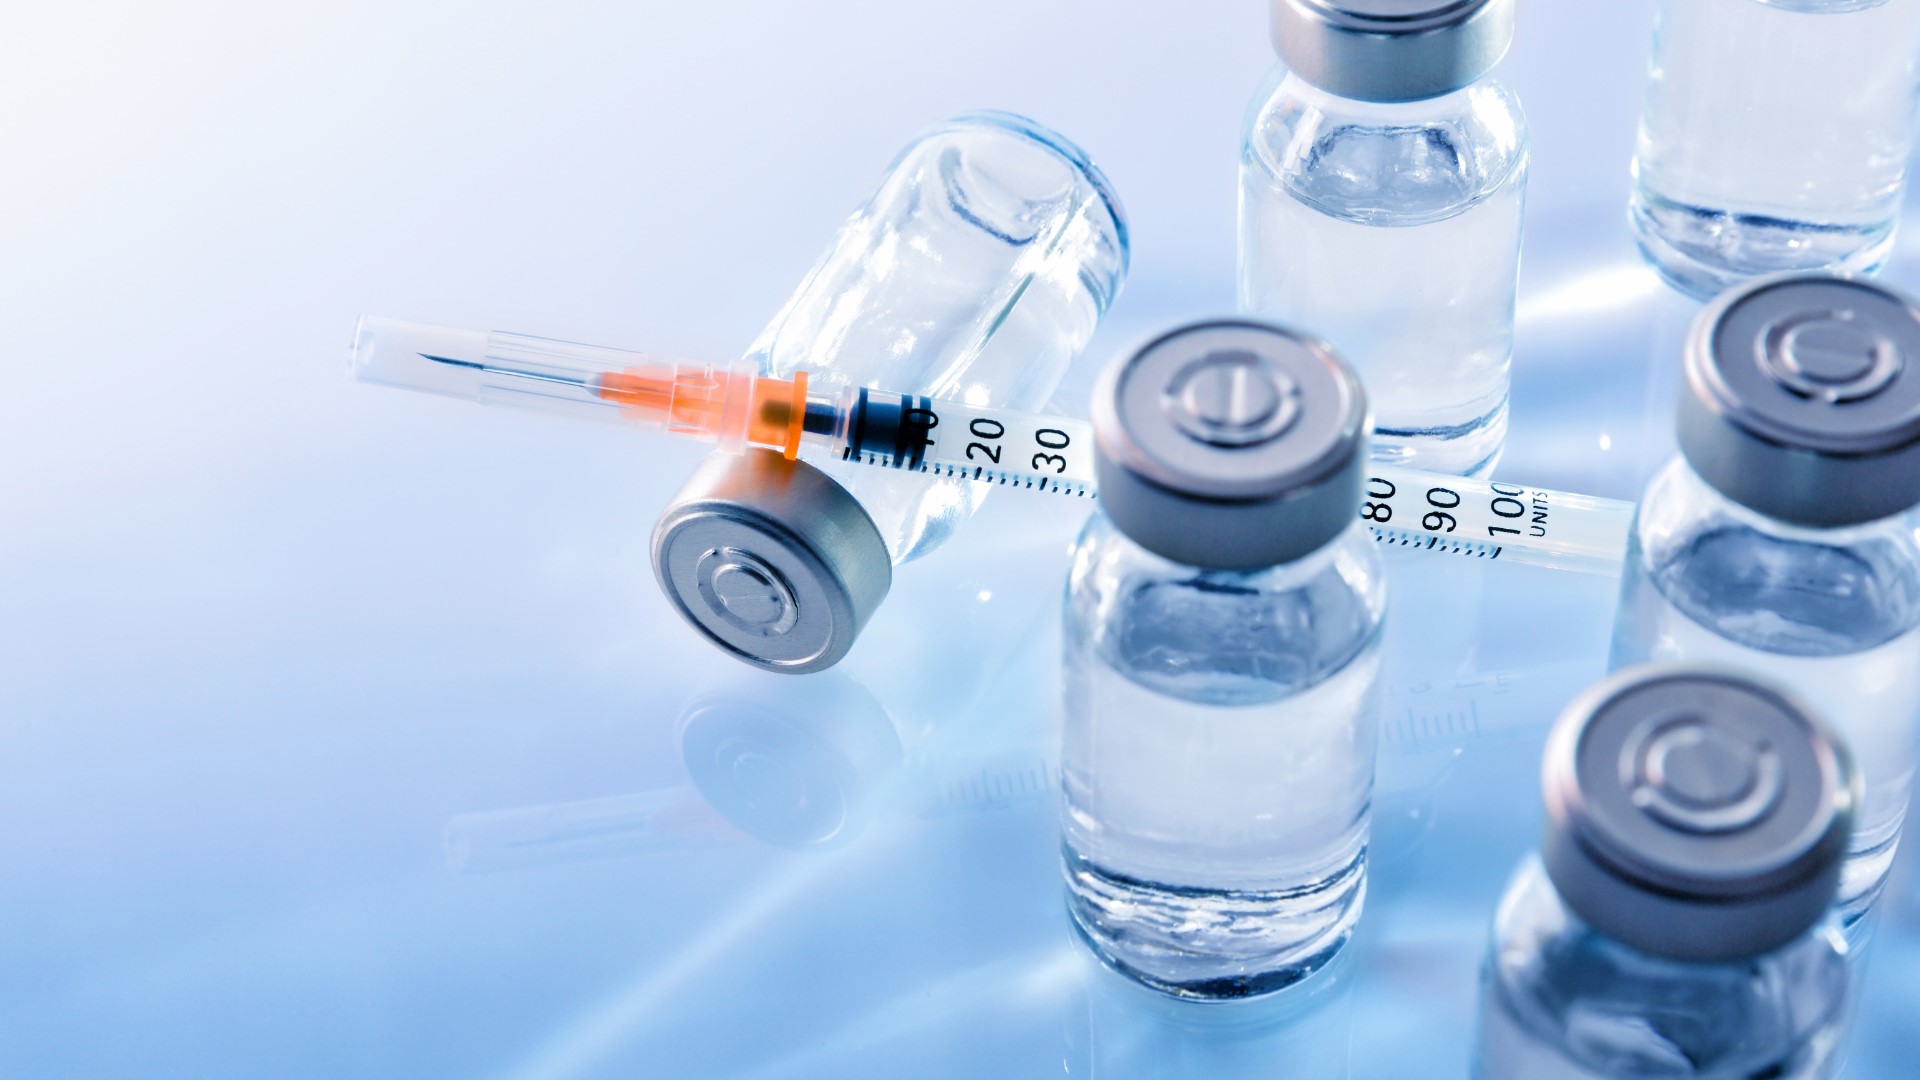 Russia's health ministry approved the vaccine after only two months of trials. Dr. Fauci has expressed he has doubts about the vaccine effectiveness and safety.